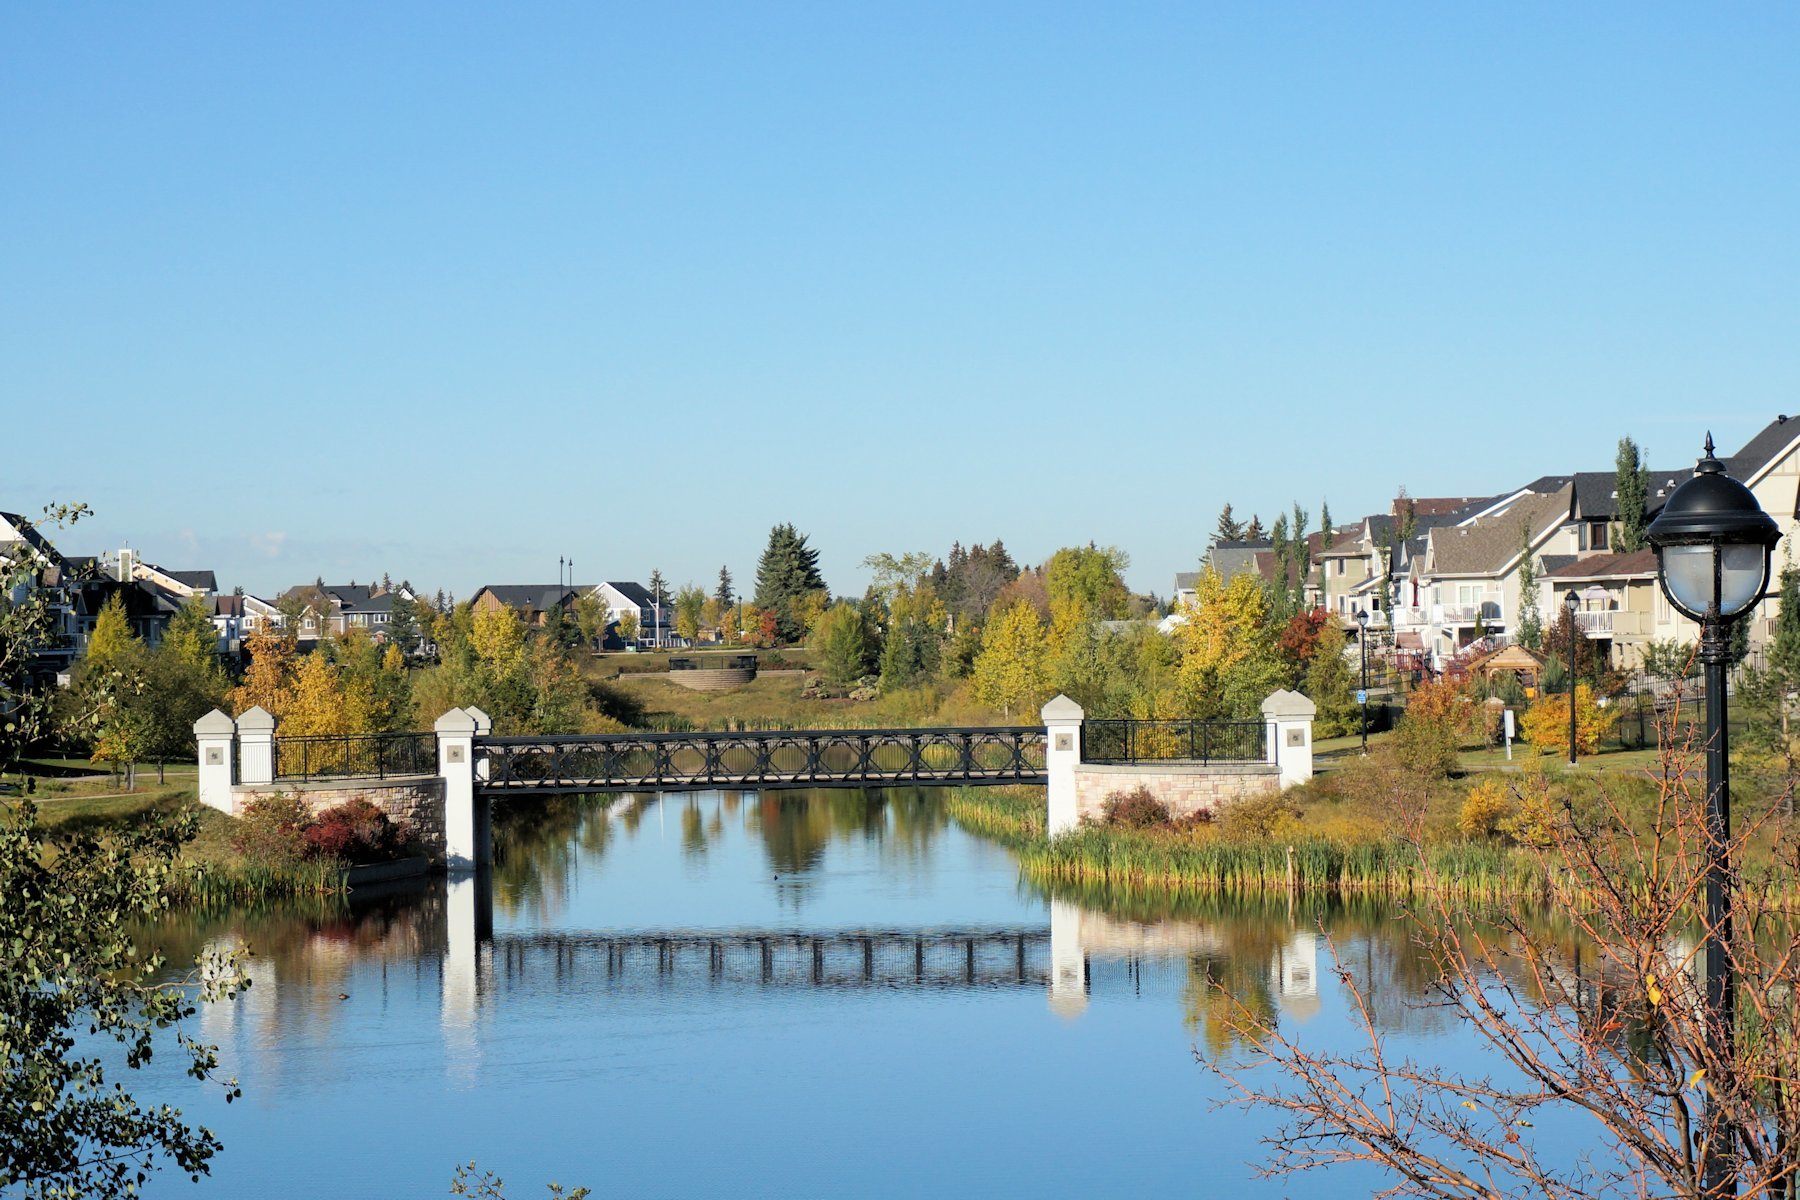 griesbach community in the fall of 2018